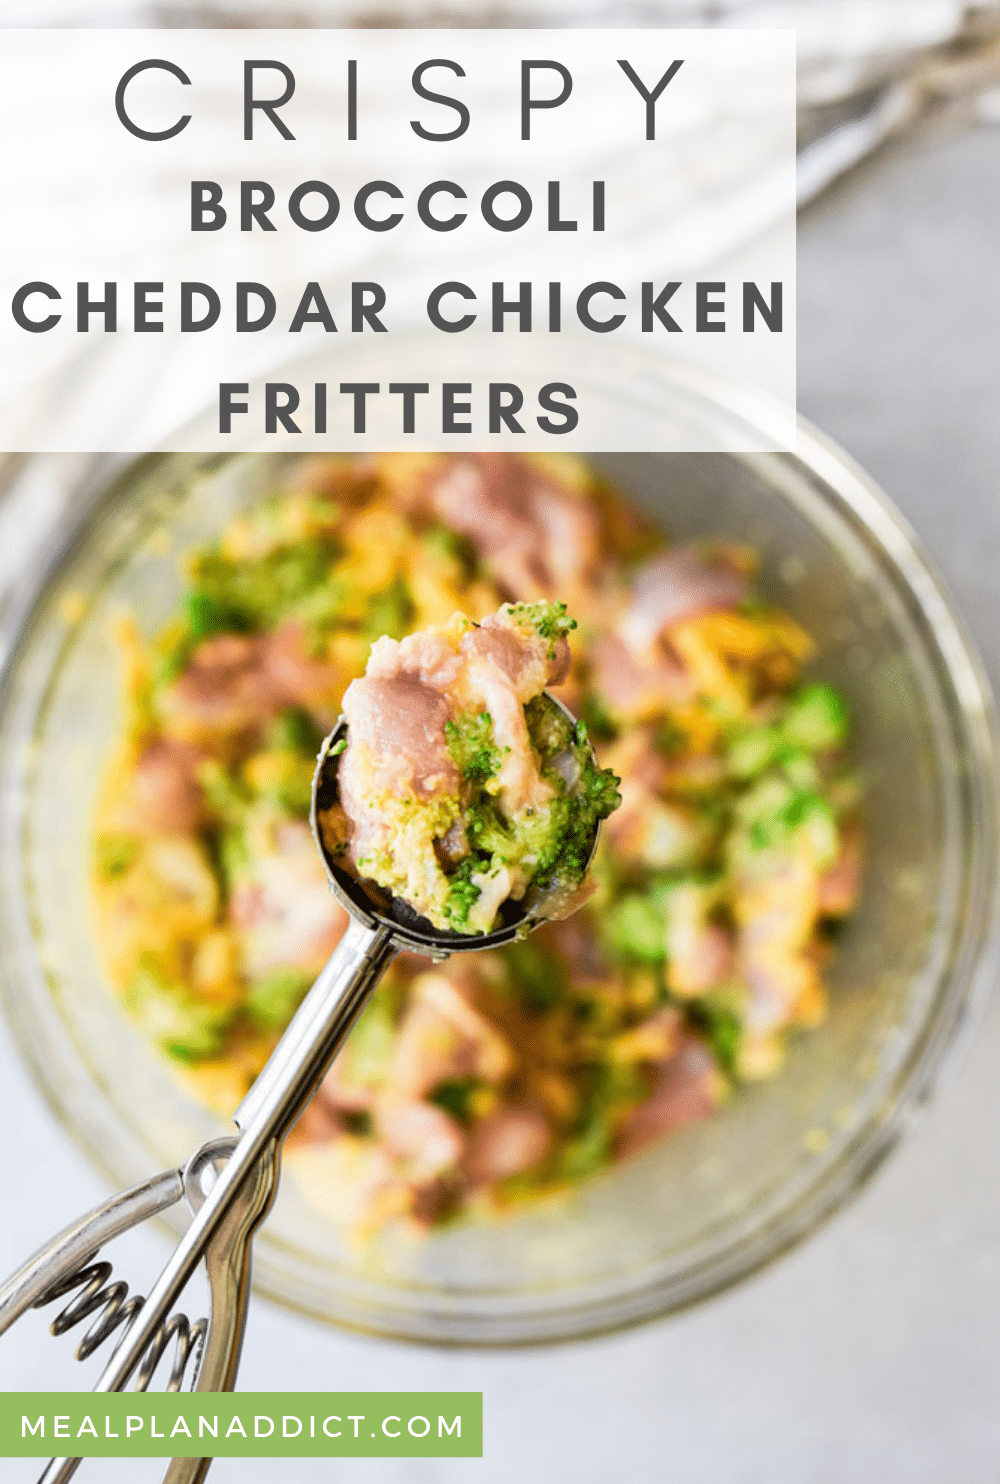 How to Make Crispy Broccoli Cheddar Chicken Fritters Meal Plan Addict